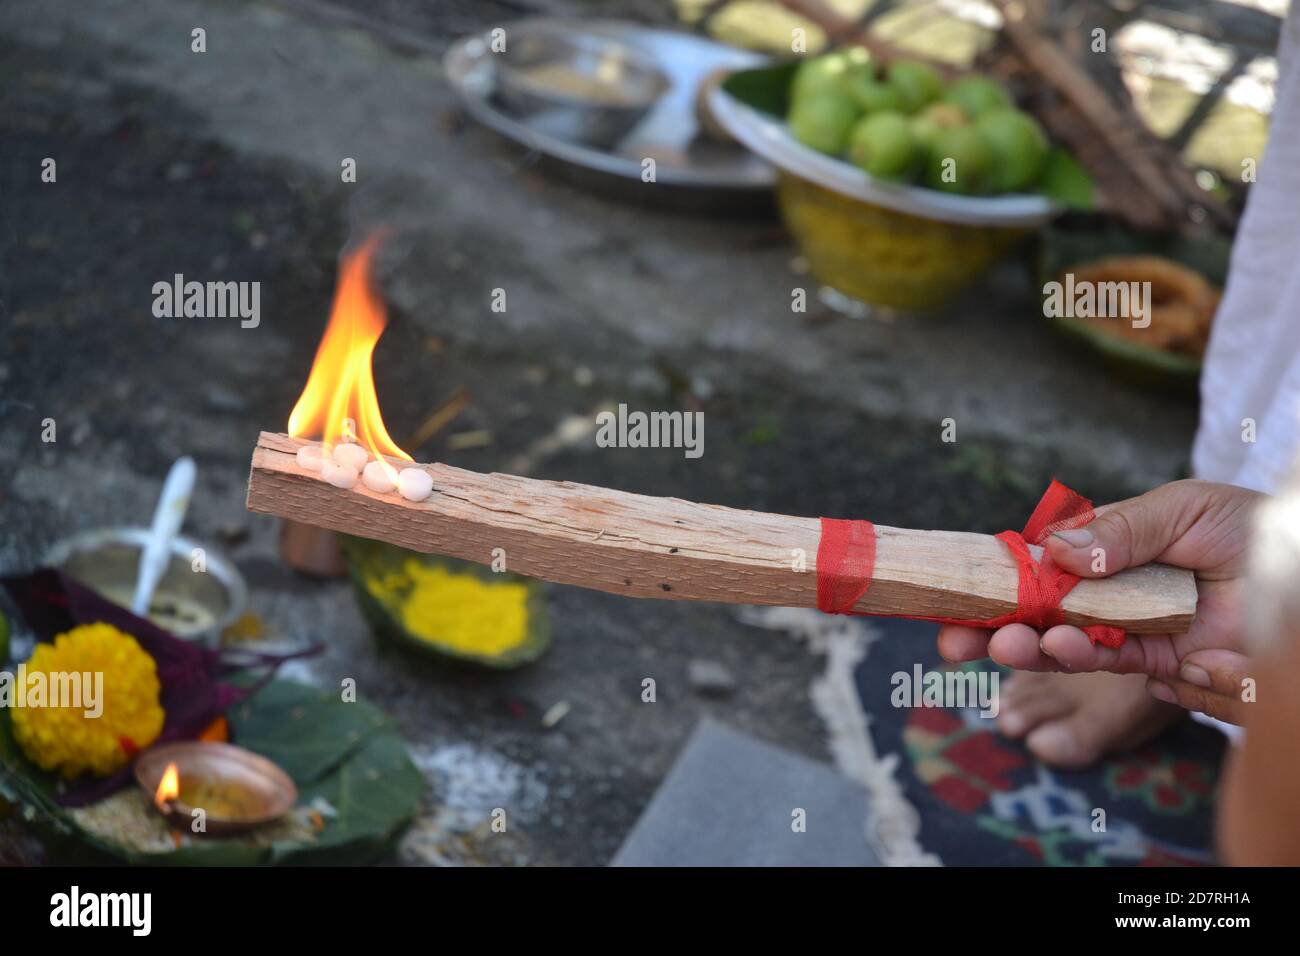 Hindu ritual called 'Yagya or Yajna'. performed with traditional mantra chanting. Pictured in Kathmandu, Nepal. Stock Photo